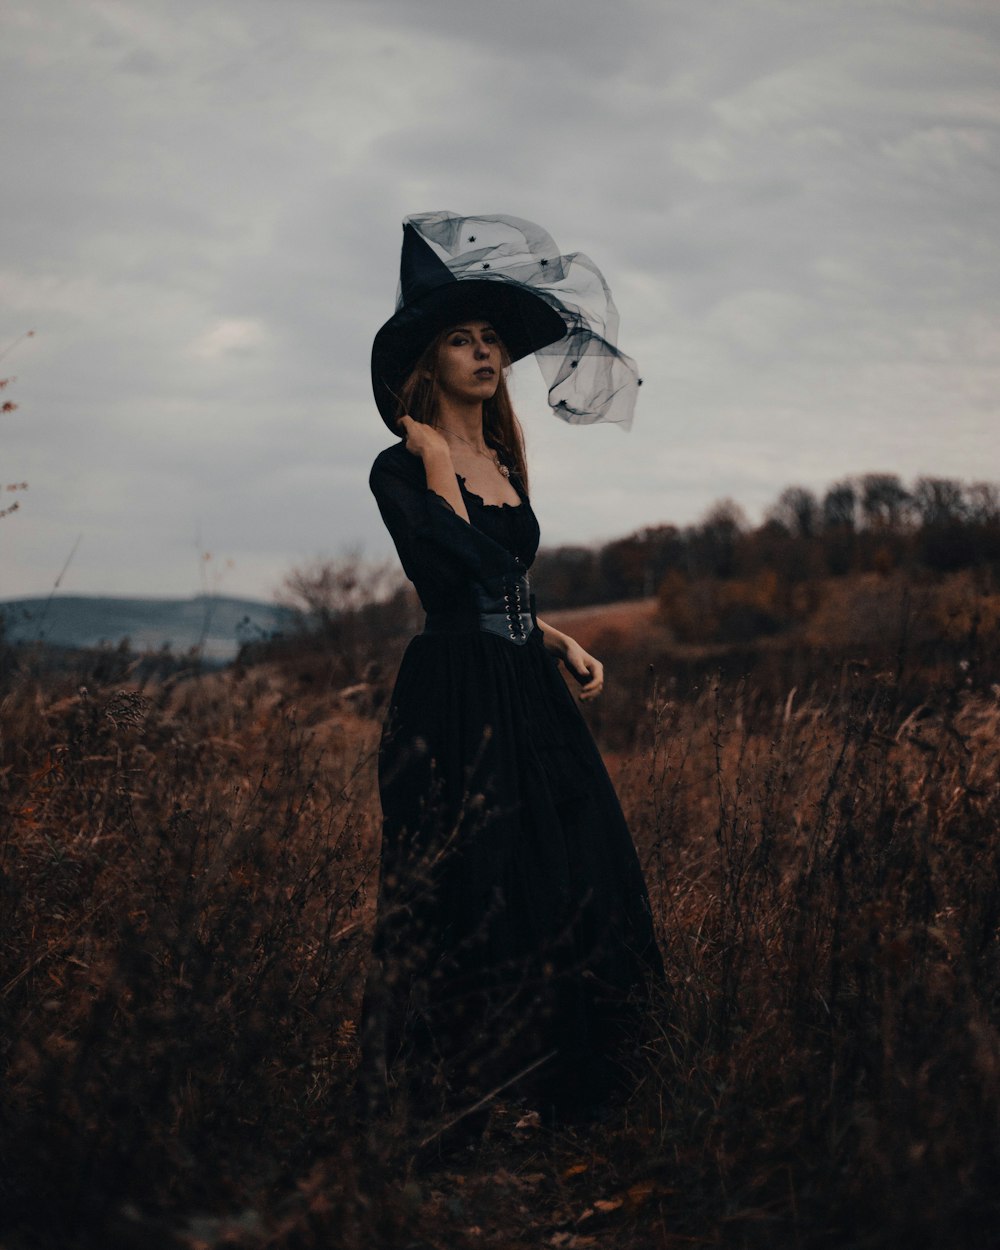 a woman in a black dress and hat standing in a field